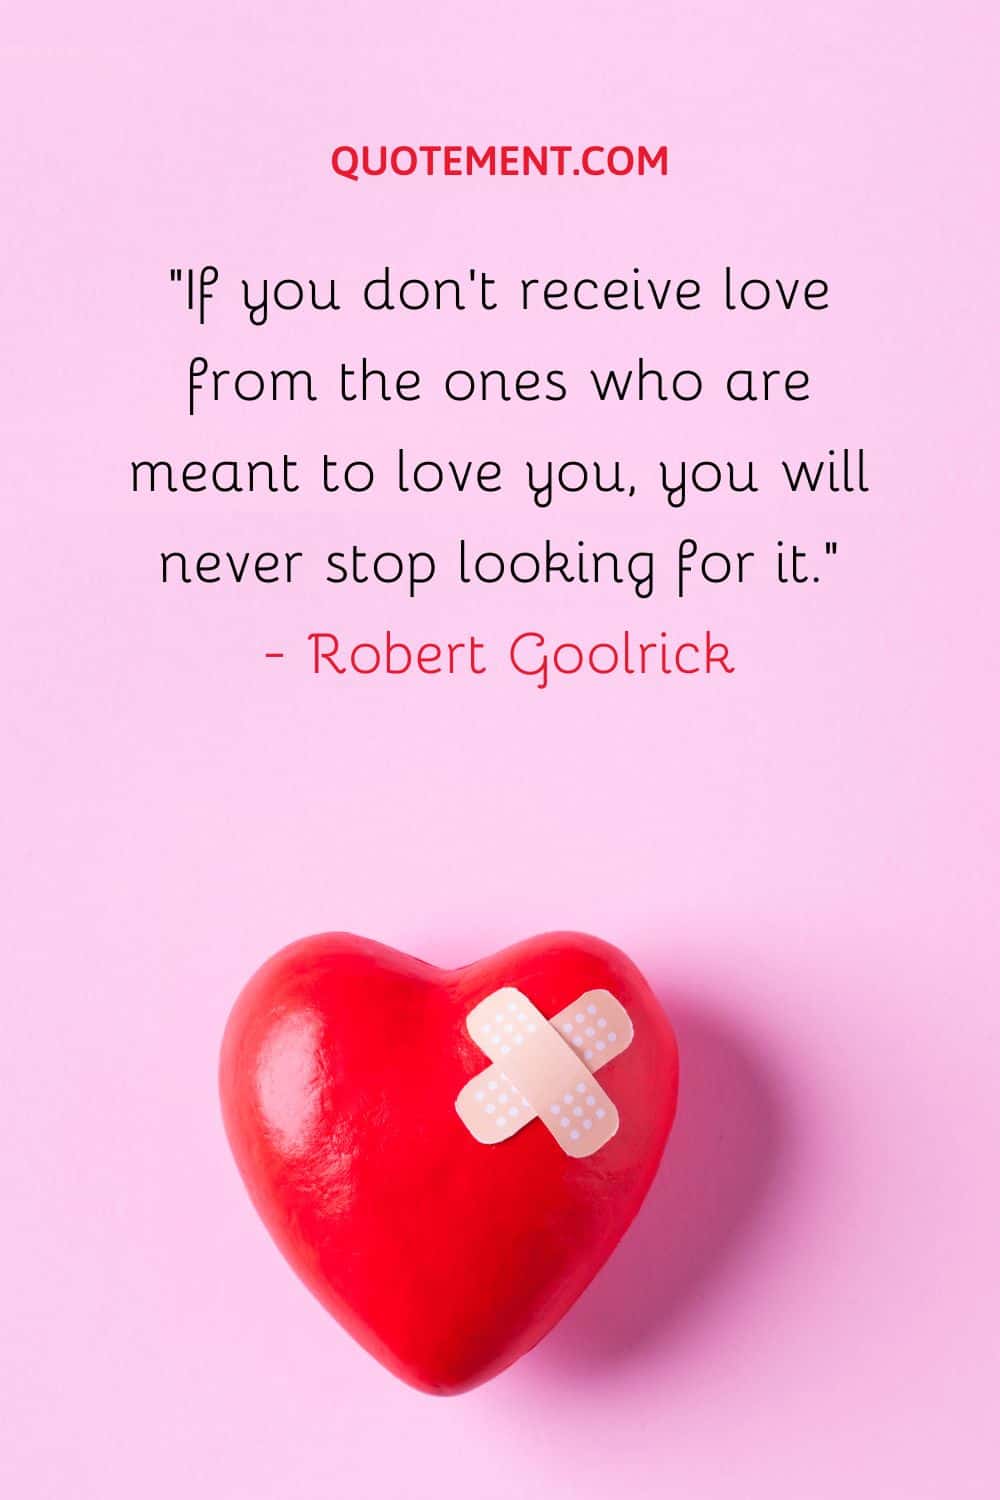 If you don’t receive love from the ones who are meant to love you, you will never stop looking for it